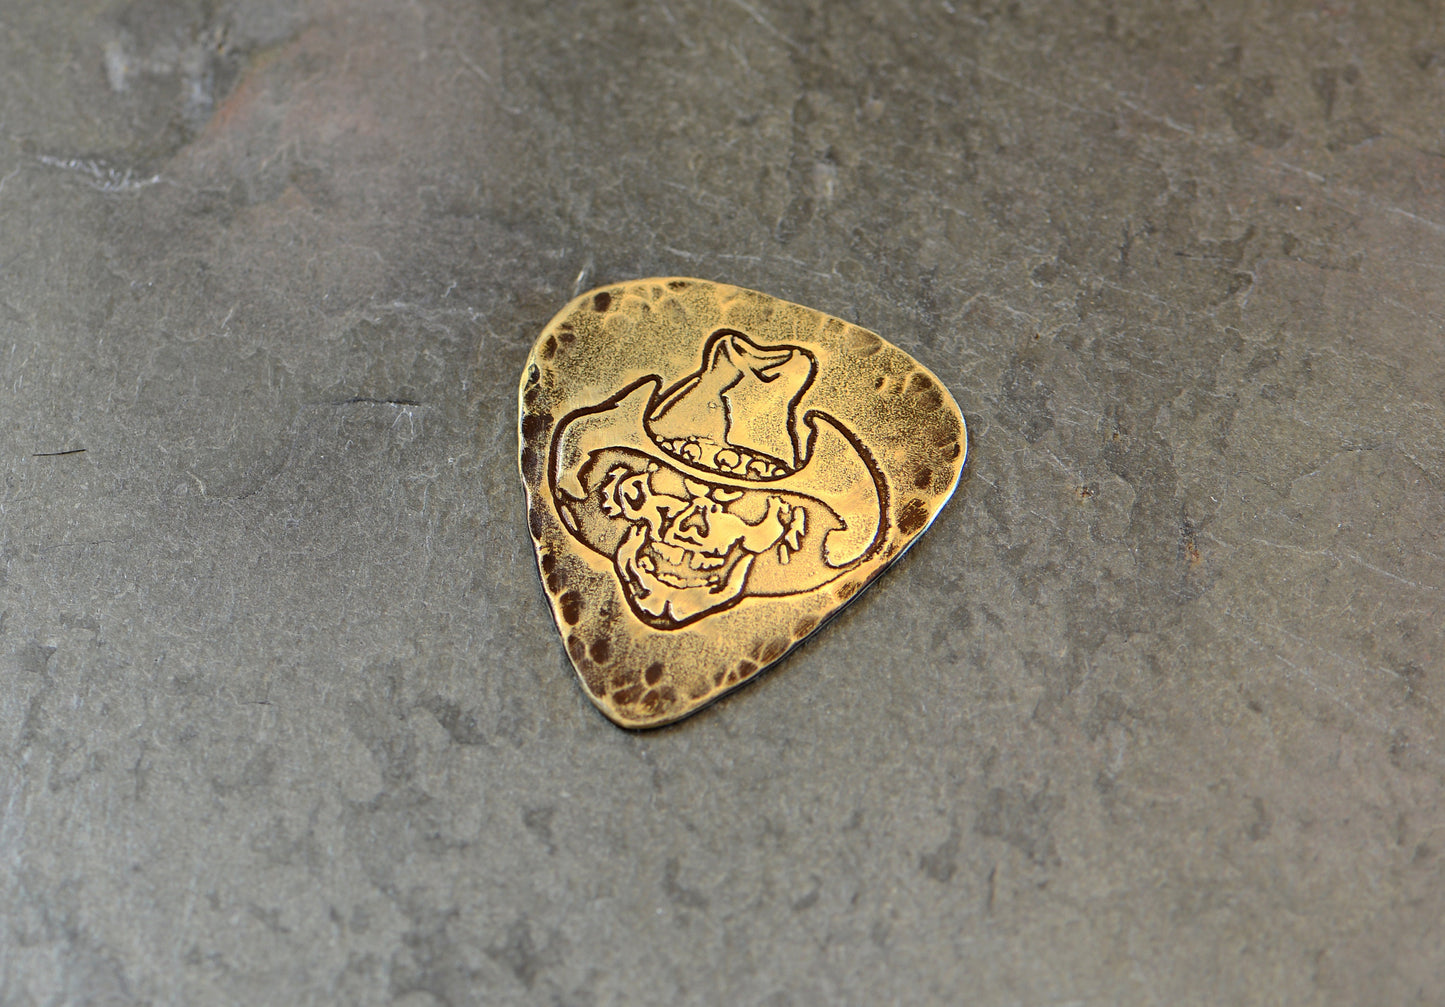 Brass guitar pick rocking a skull with cowboy hat